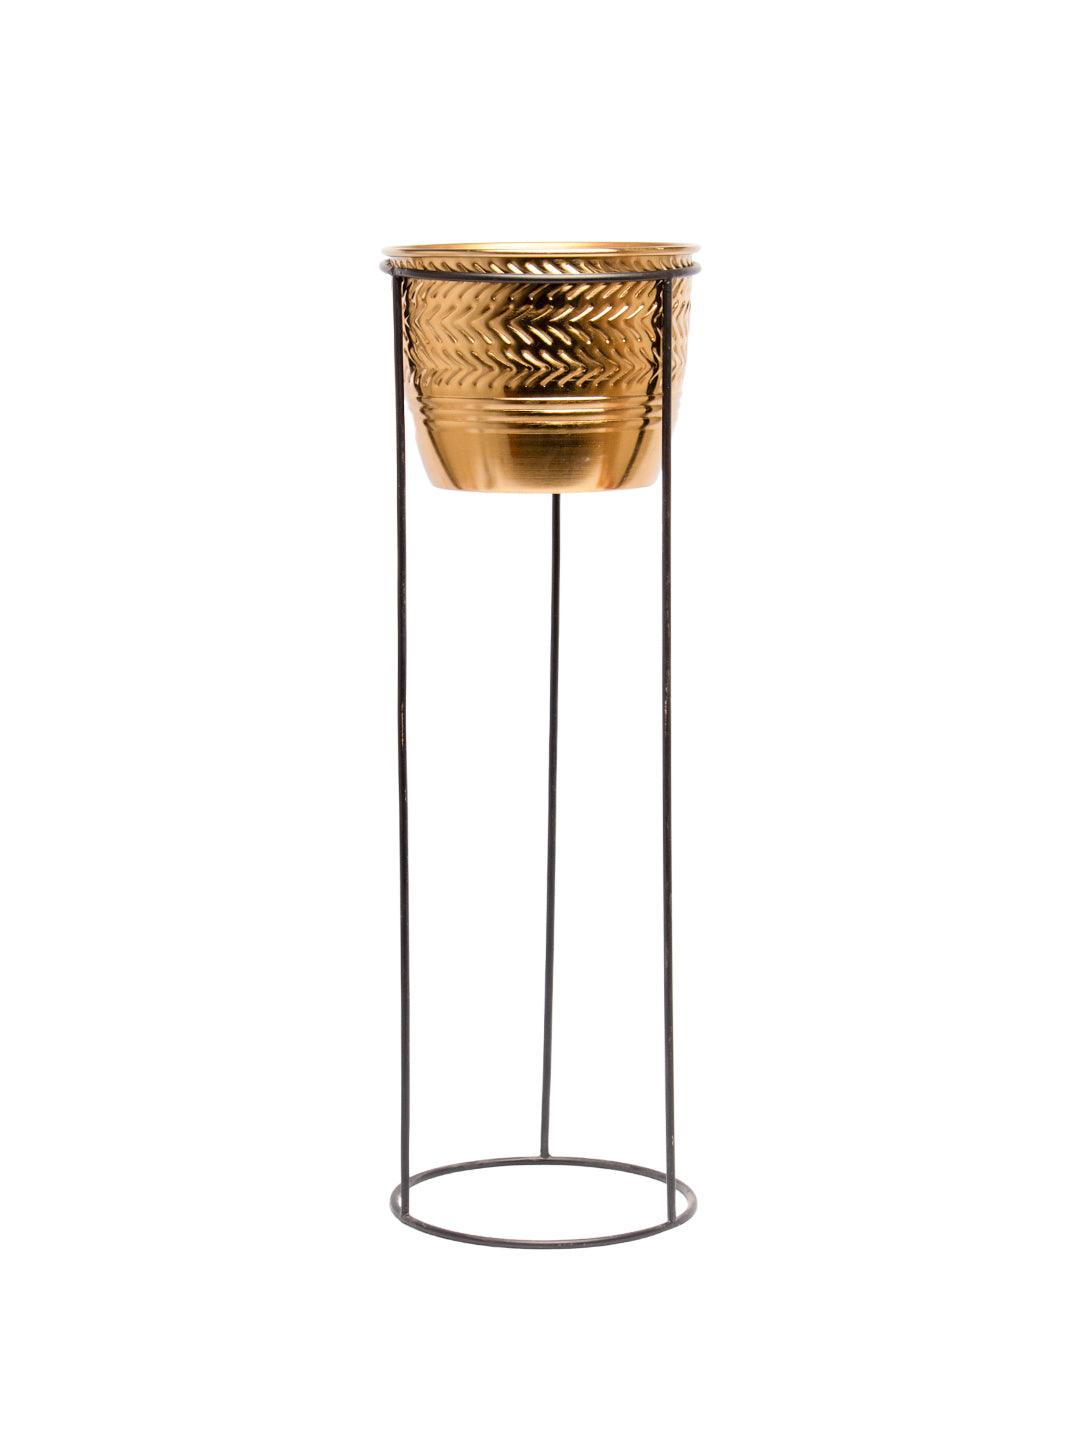 Gold Hammered Metal Floor Planter with Stand - MARKET 99